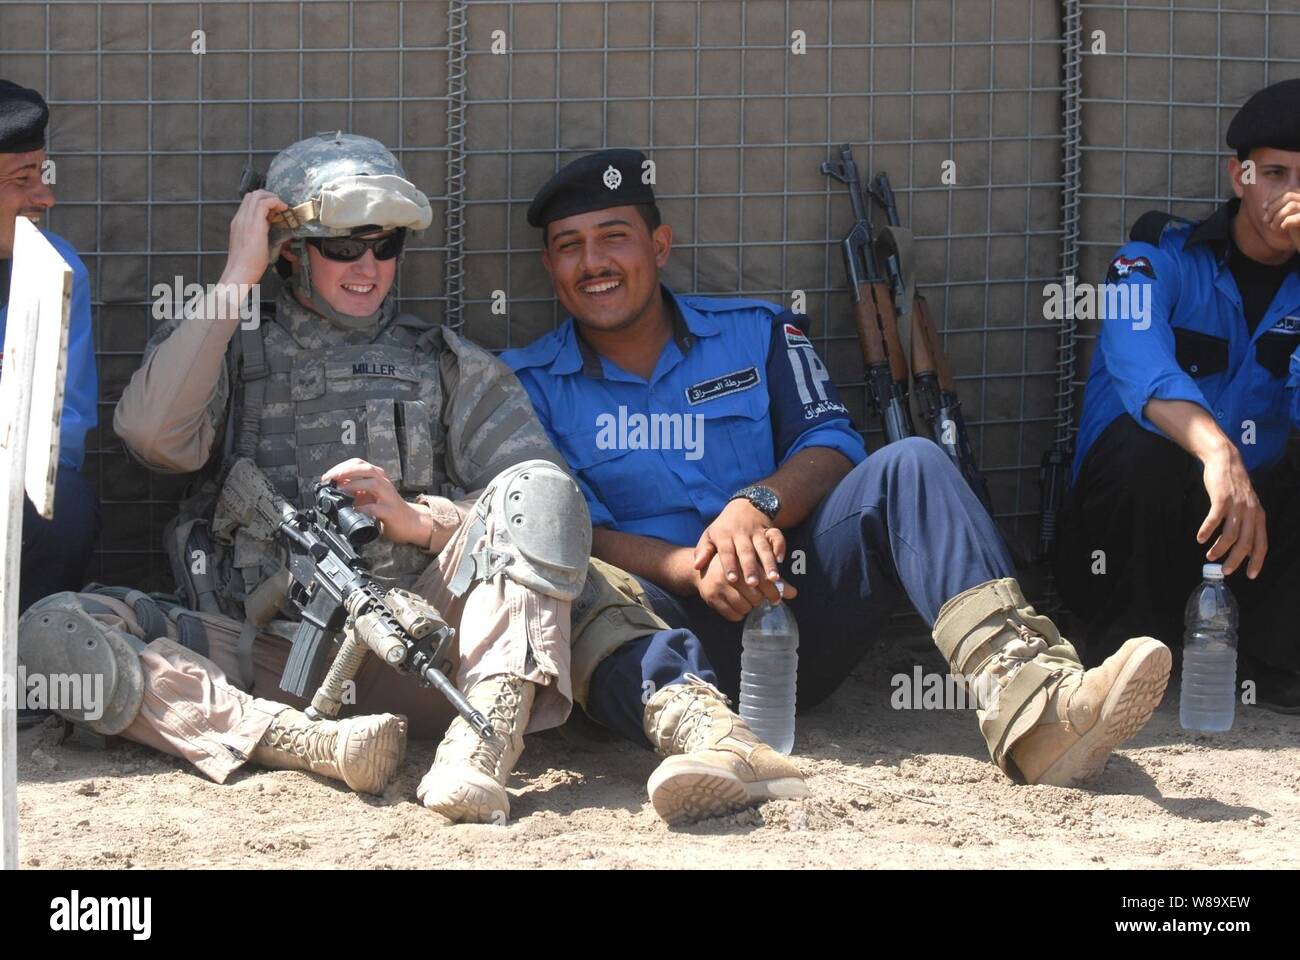 U.S. Air Force Senior Airman Miller, attached to the Rough Riders, 91st Battalion, Task Force Dragon, relaxes with a group of Iraqi policemen at a firing range in Mahmudiyah, Iraq, on April 23, 2009.  The Rough Riders are instructing Iraqi policemen how to safely aim and fire their weapons.  These policemen will be sent out to instruct other Iraqi police officers throughout the country. Stock Photo